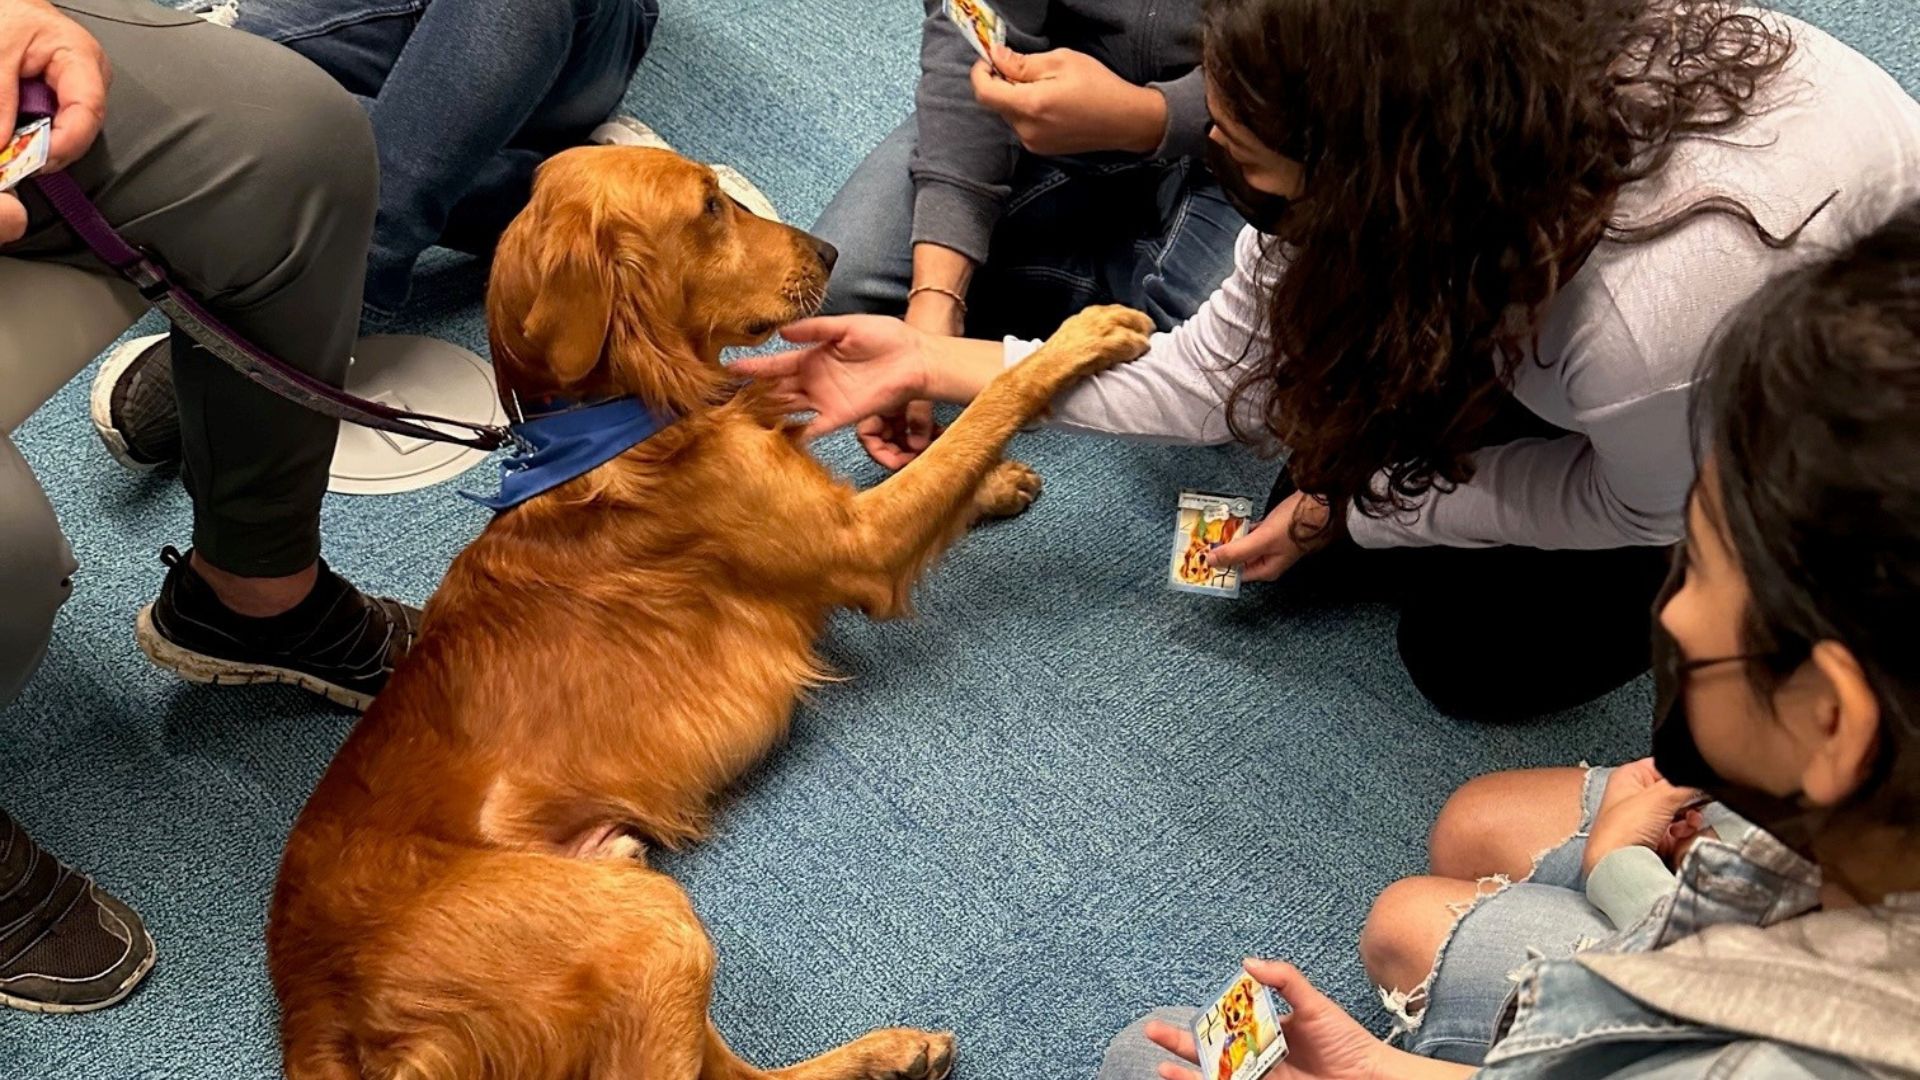 Students at UC San Diego petting a golden retriever at Geisel Library for the Library's De-Stress with Pups event series.